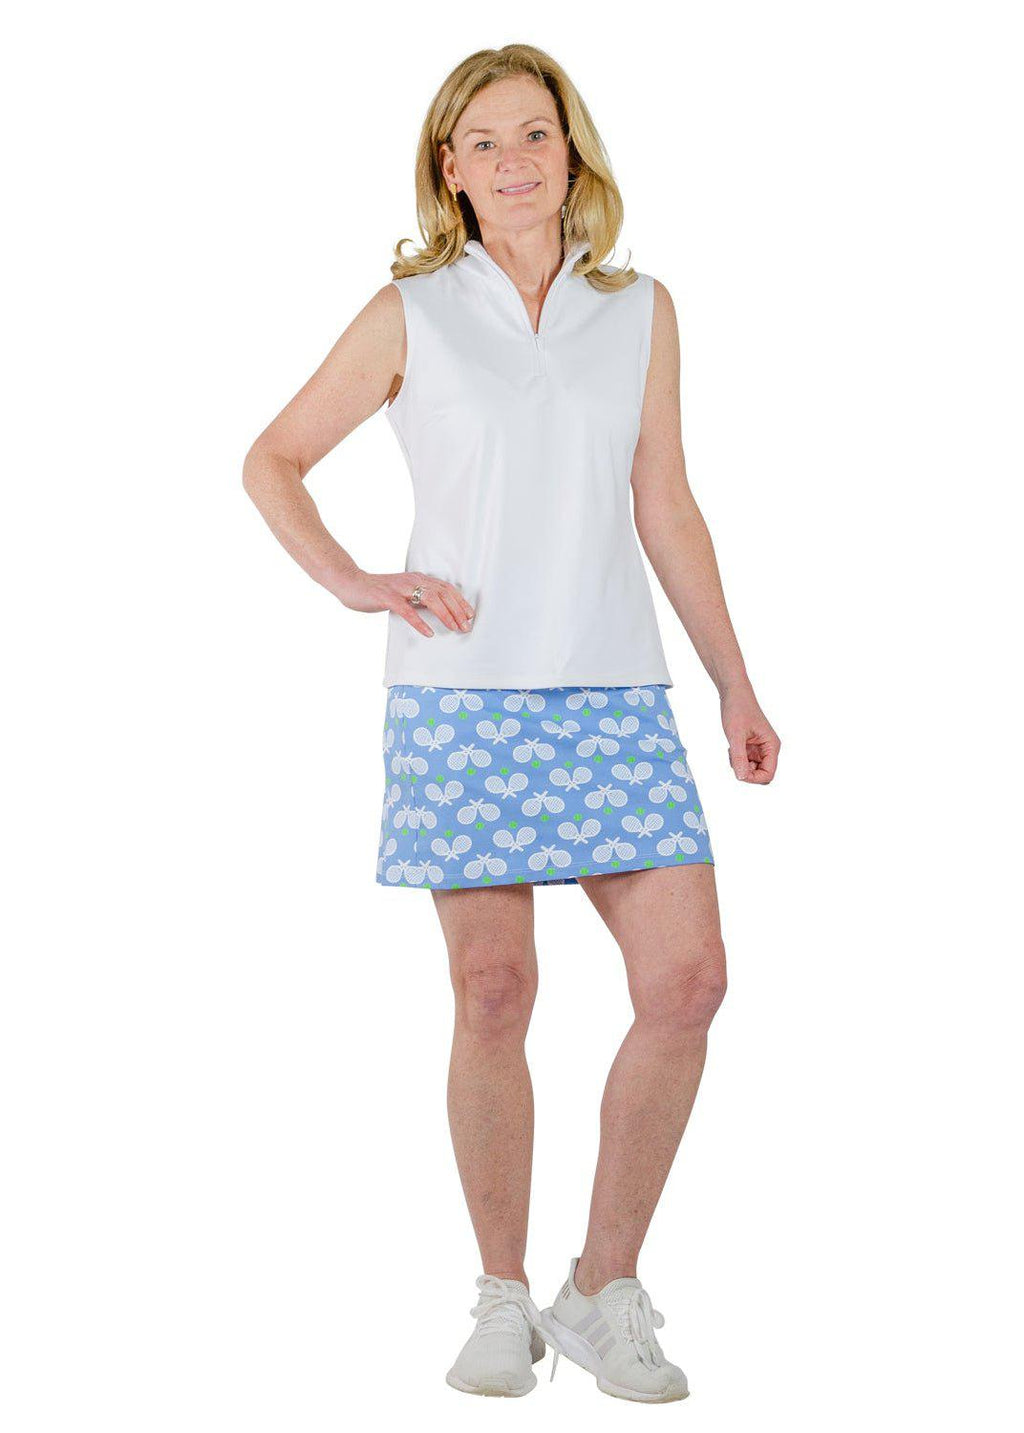 Country Club Skort - What a Racket 15" or 17" length - FINAL SALE